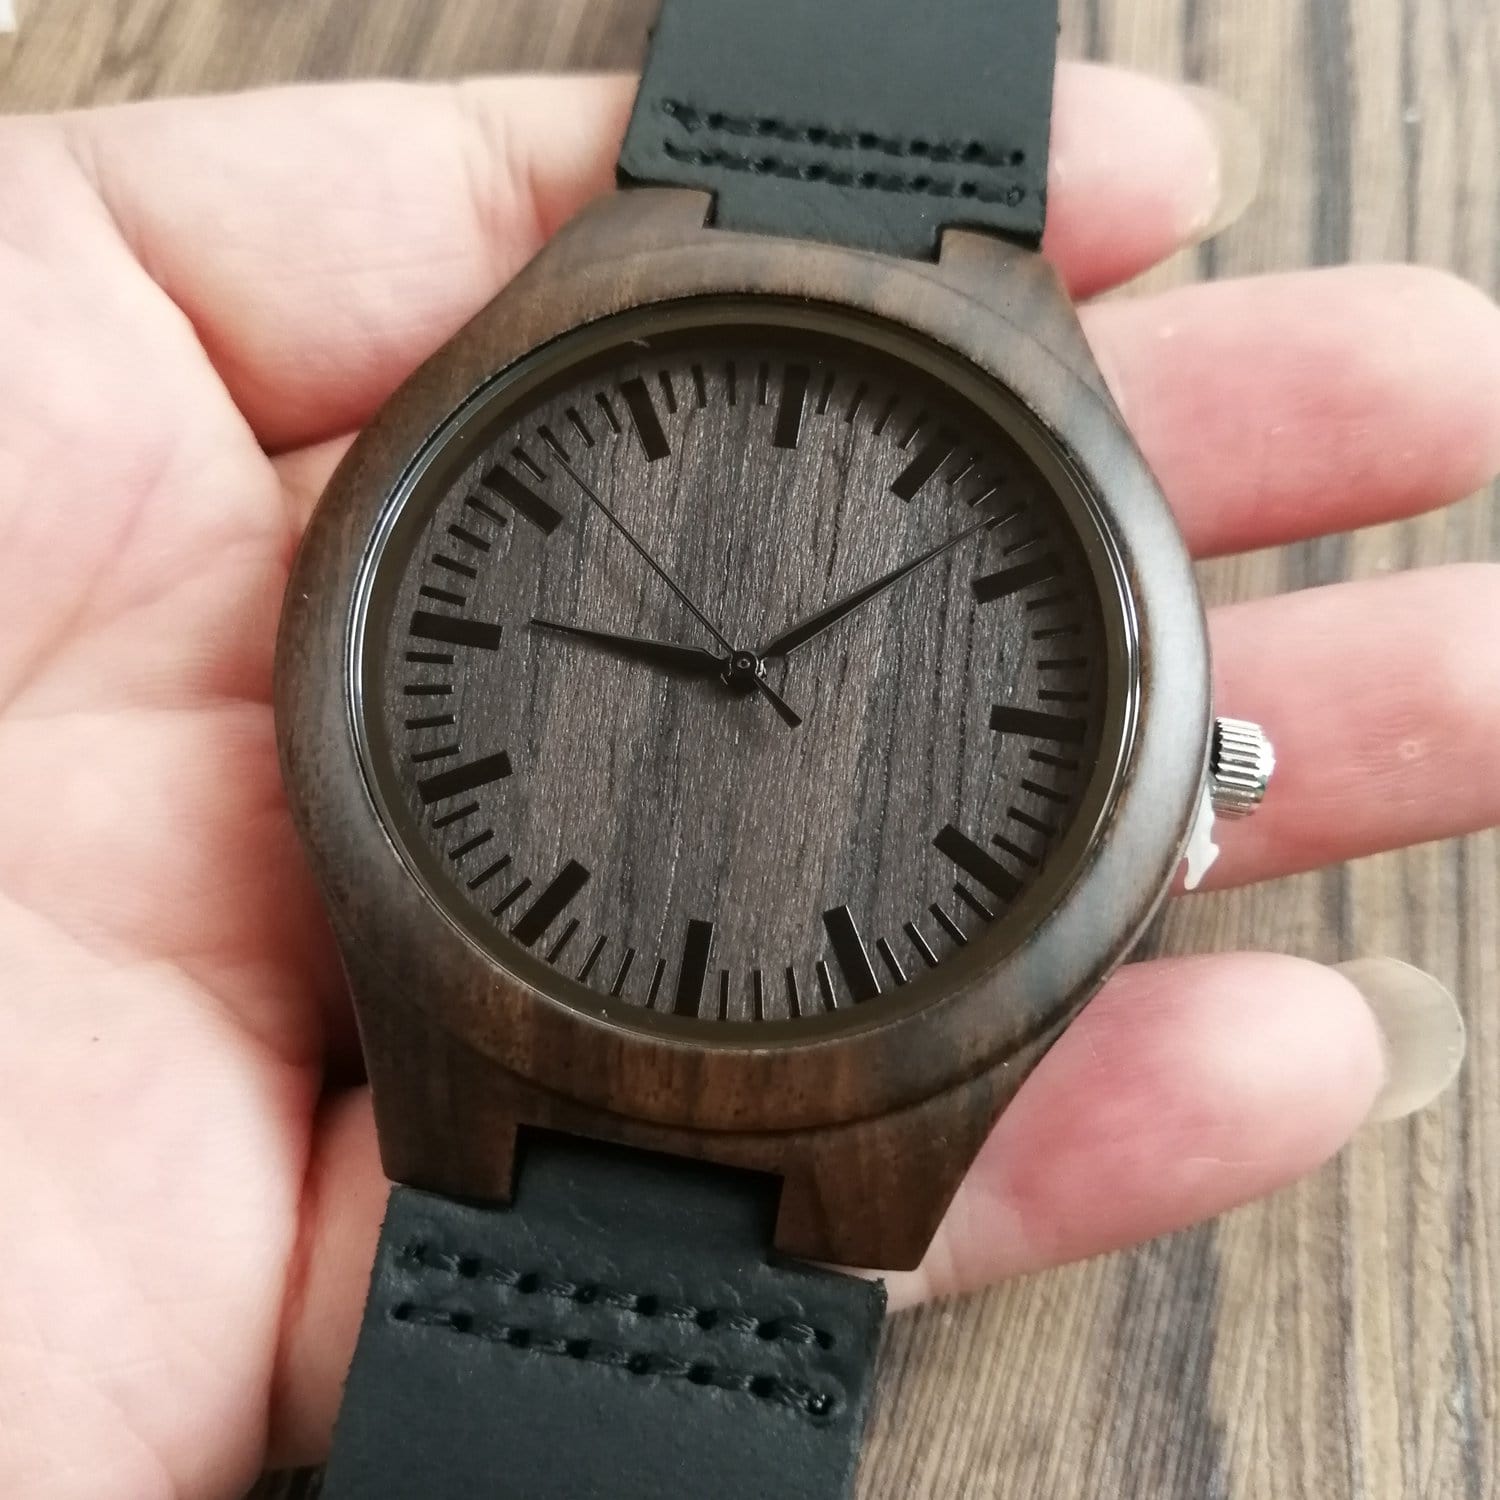 Watches To My Future Husband - I Choose You Again And Again Engraved Wood Watch GiveMe-Gifts